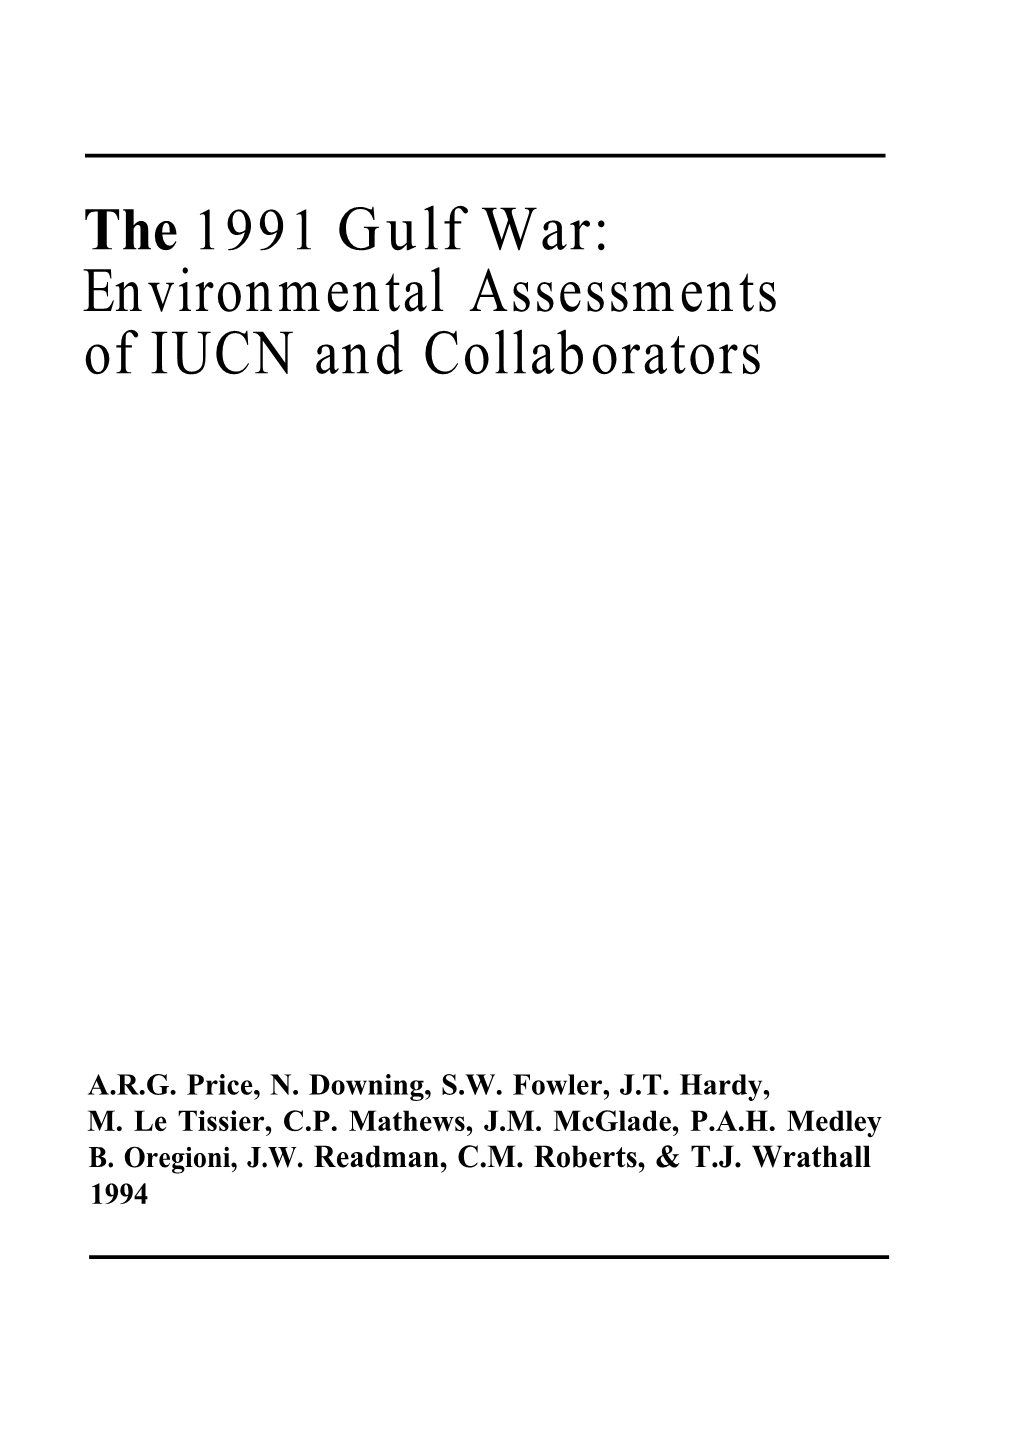 The 1991 Gulf War: Environmental Assessments of IUCN and Collaborators